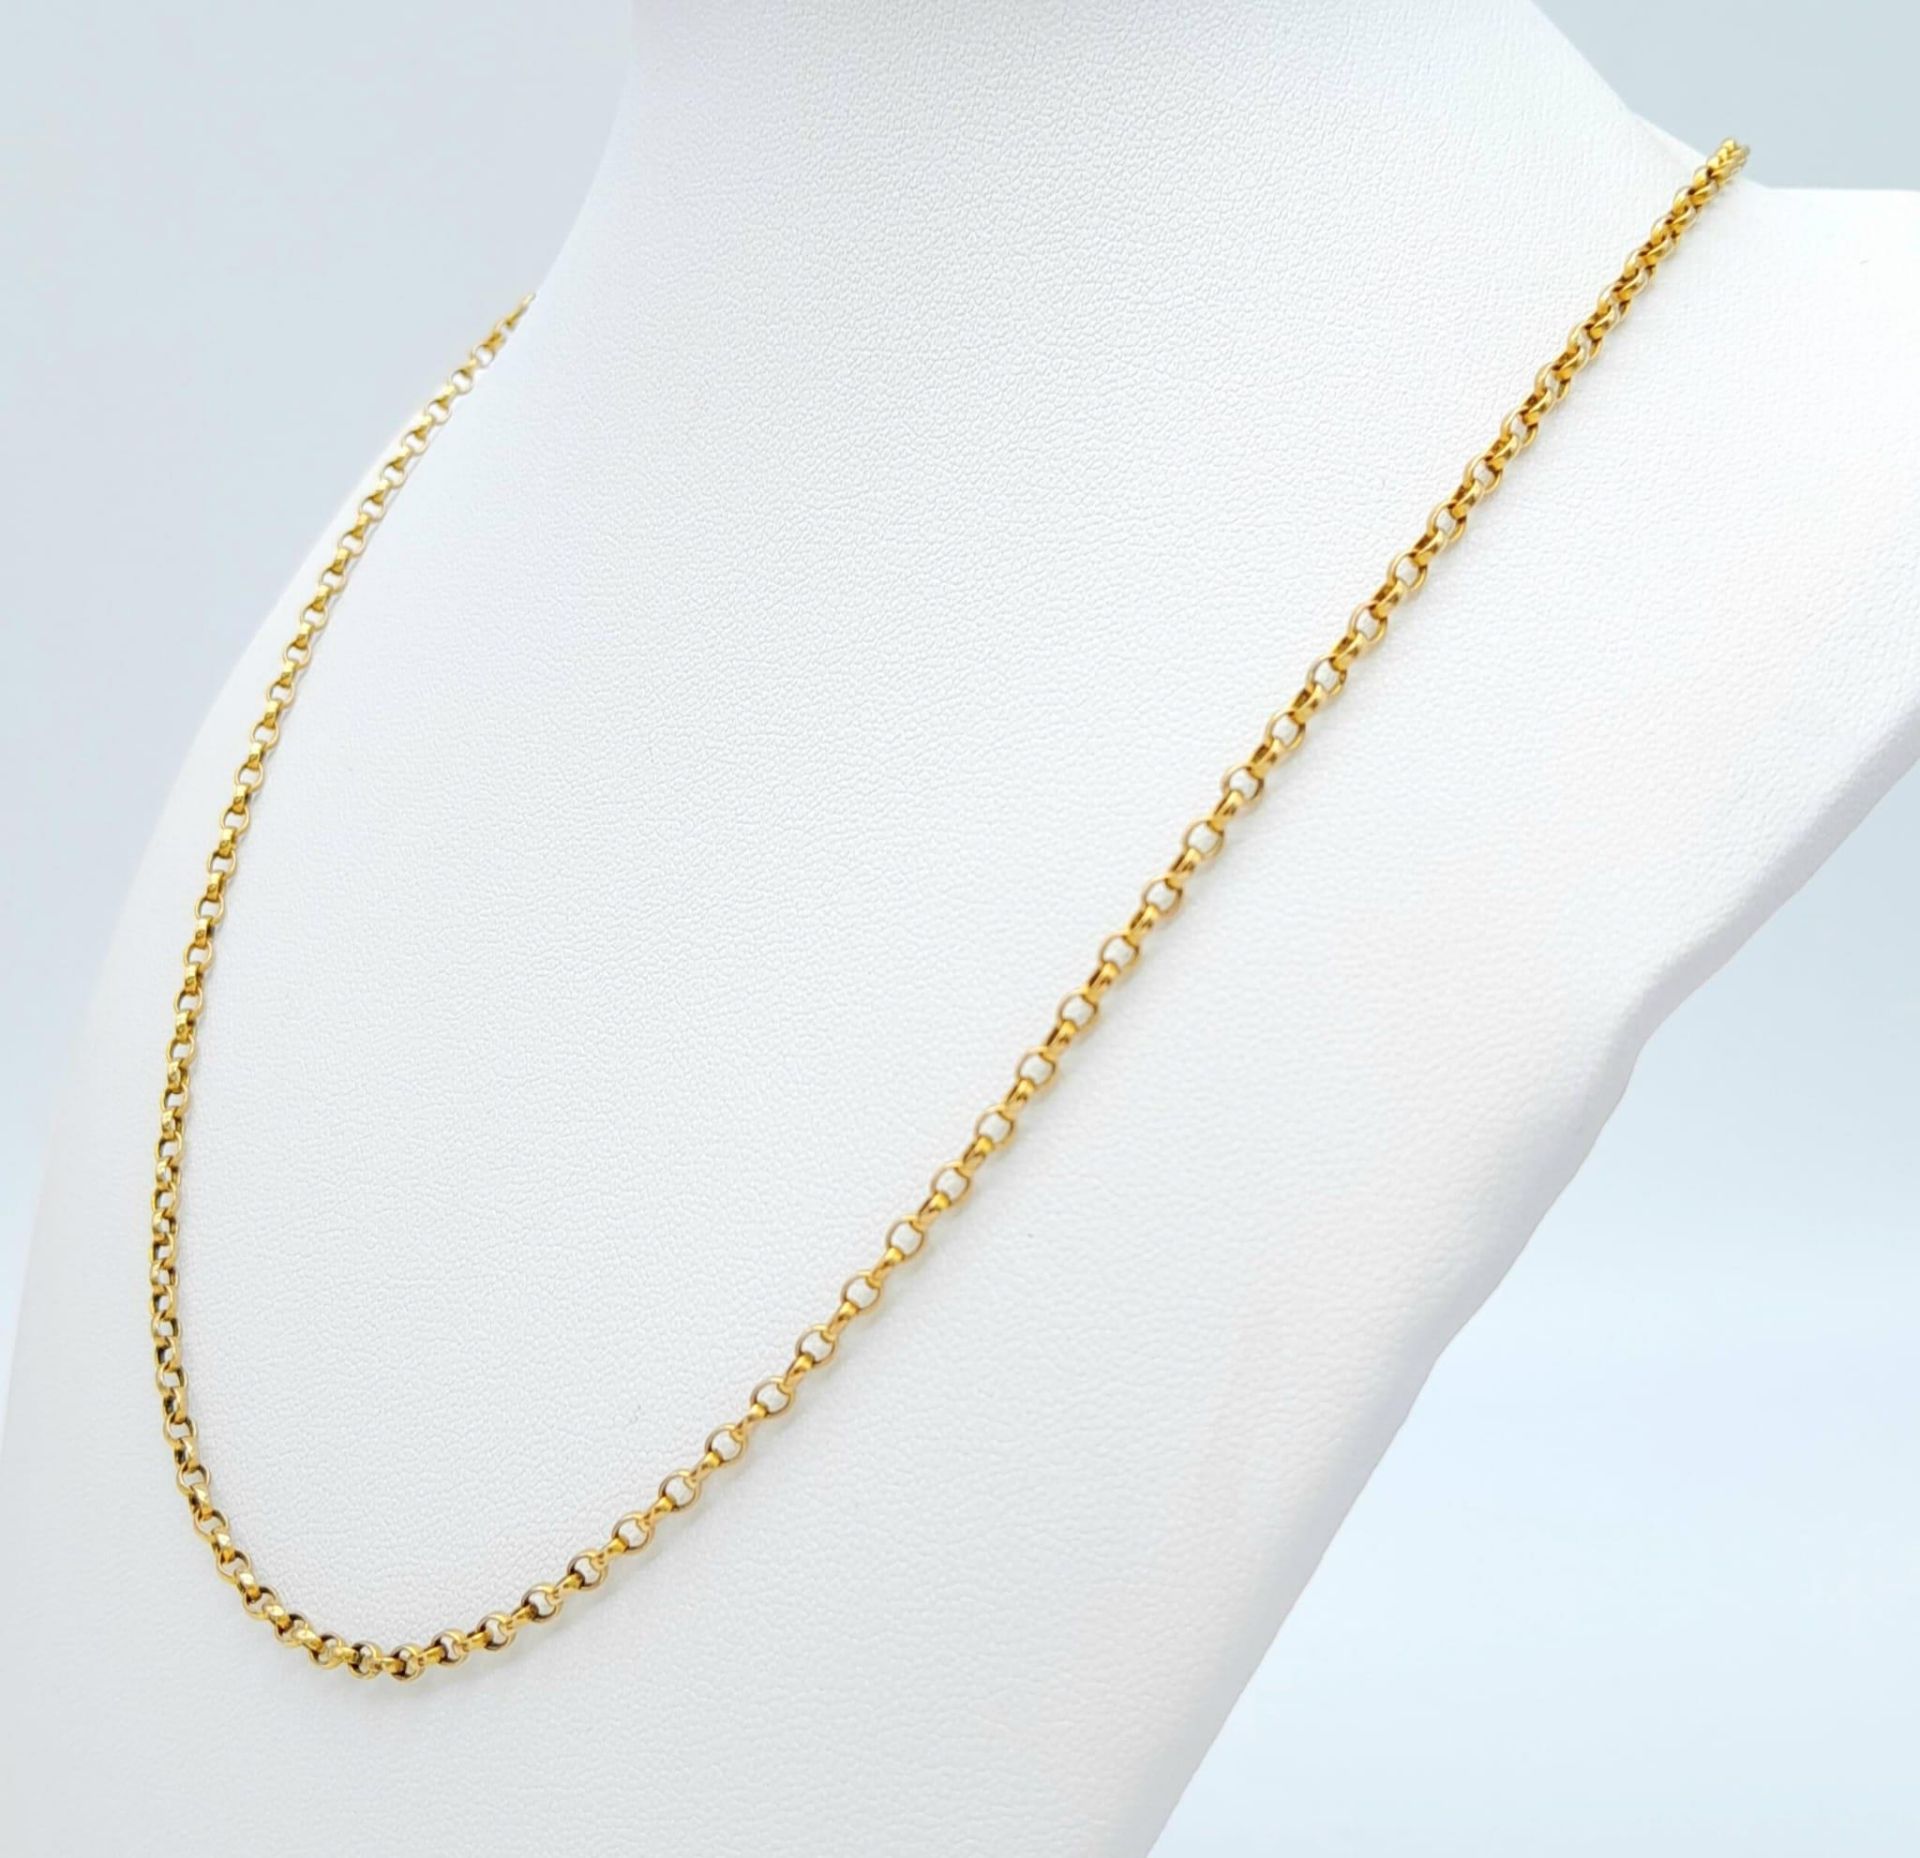 A 9 K yellow gold chain necklace, length: 56 cm, weight: 7.2 g. - Image 2 of 4